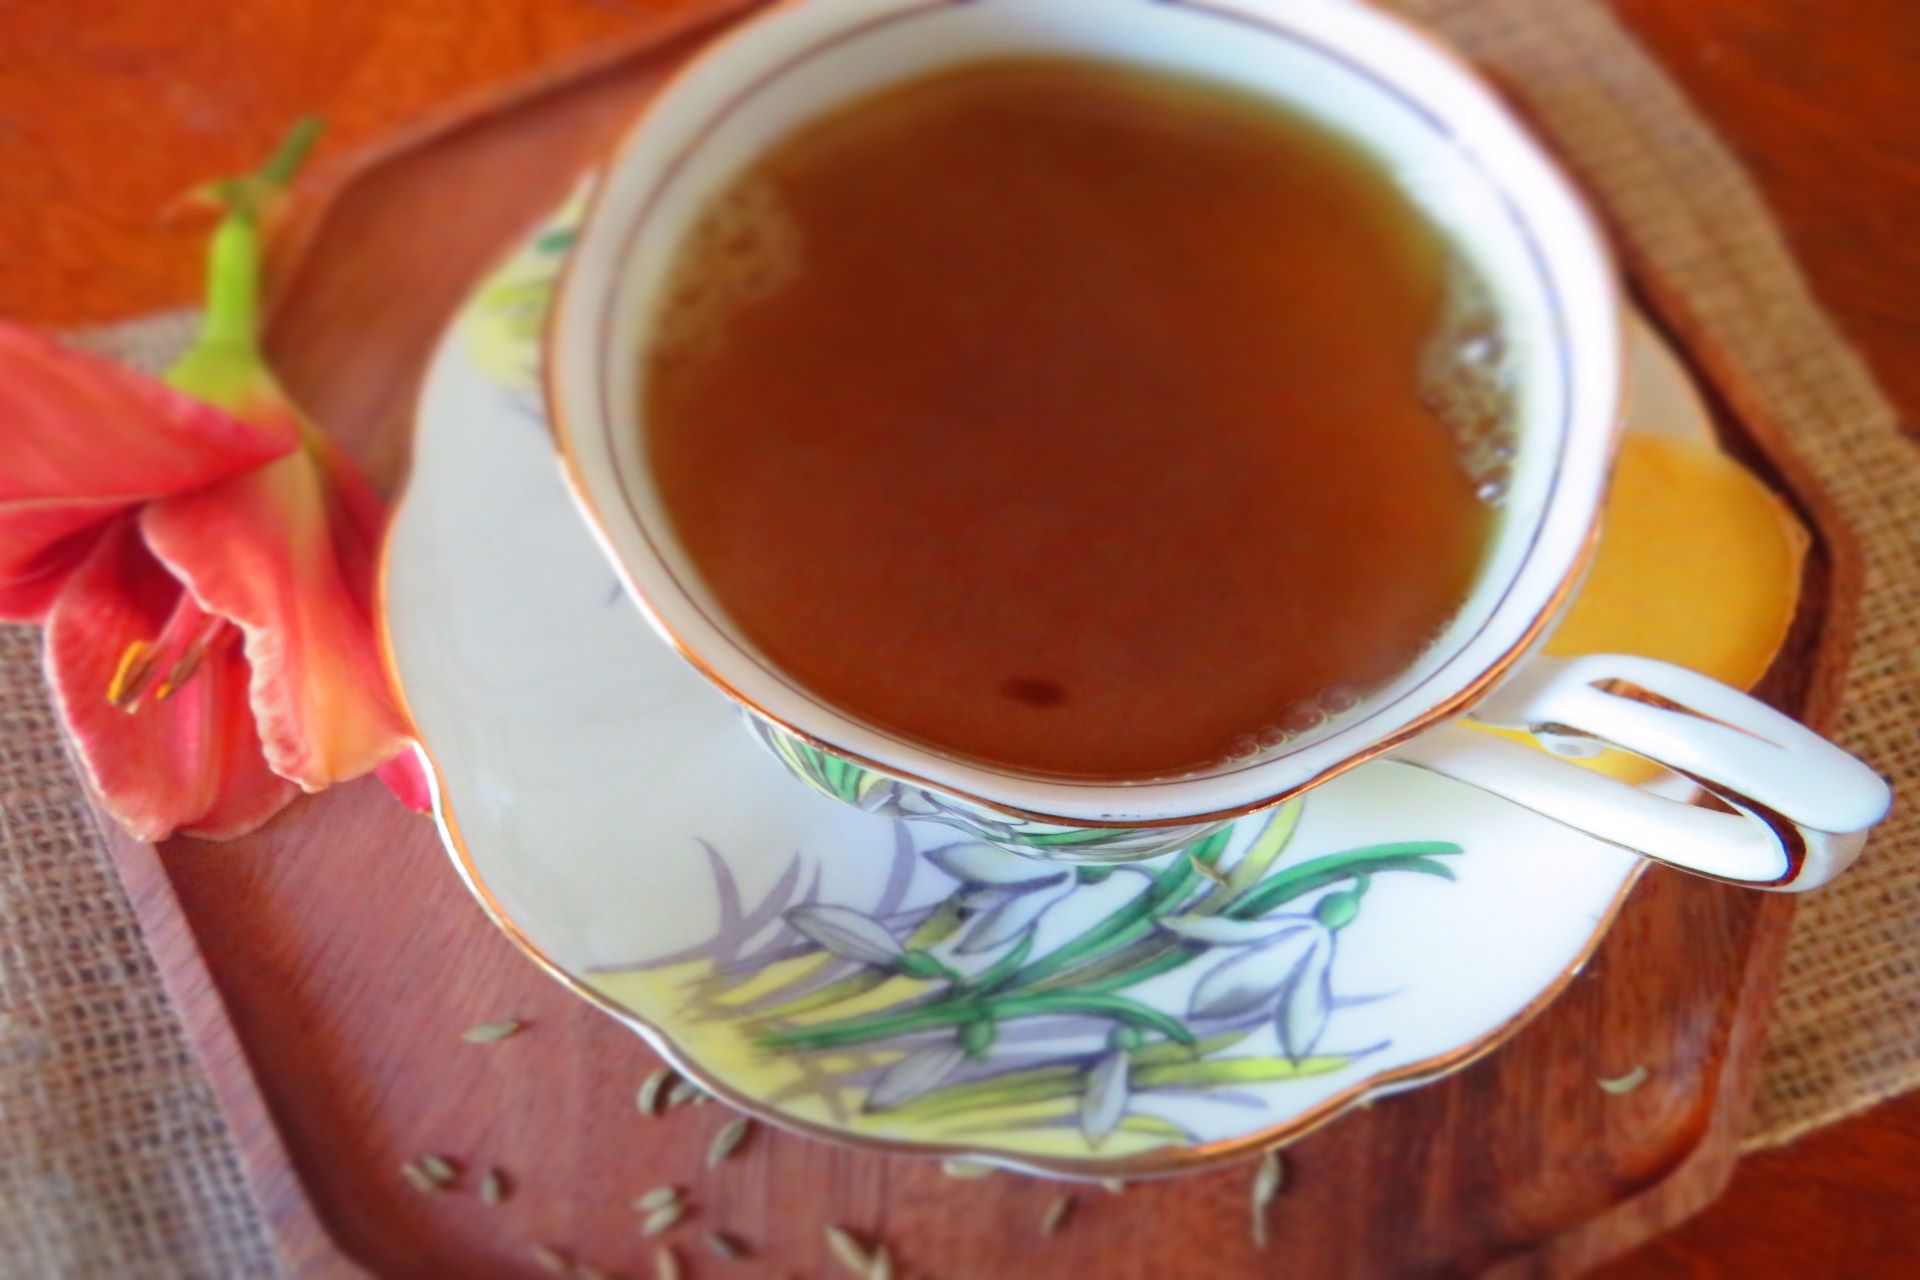 Tea made with fennel, cumin seeds, and ginger